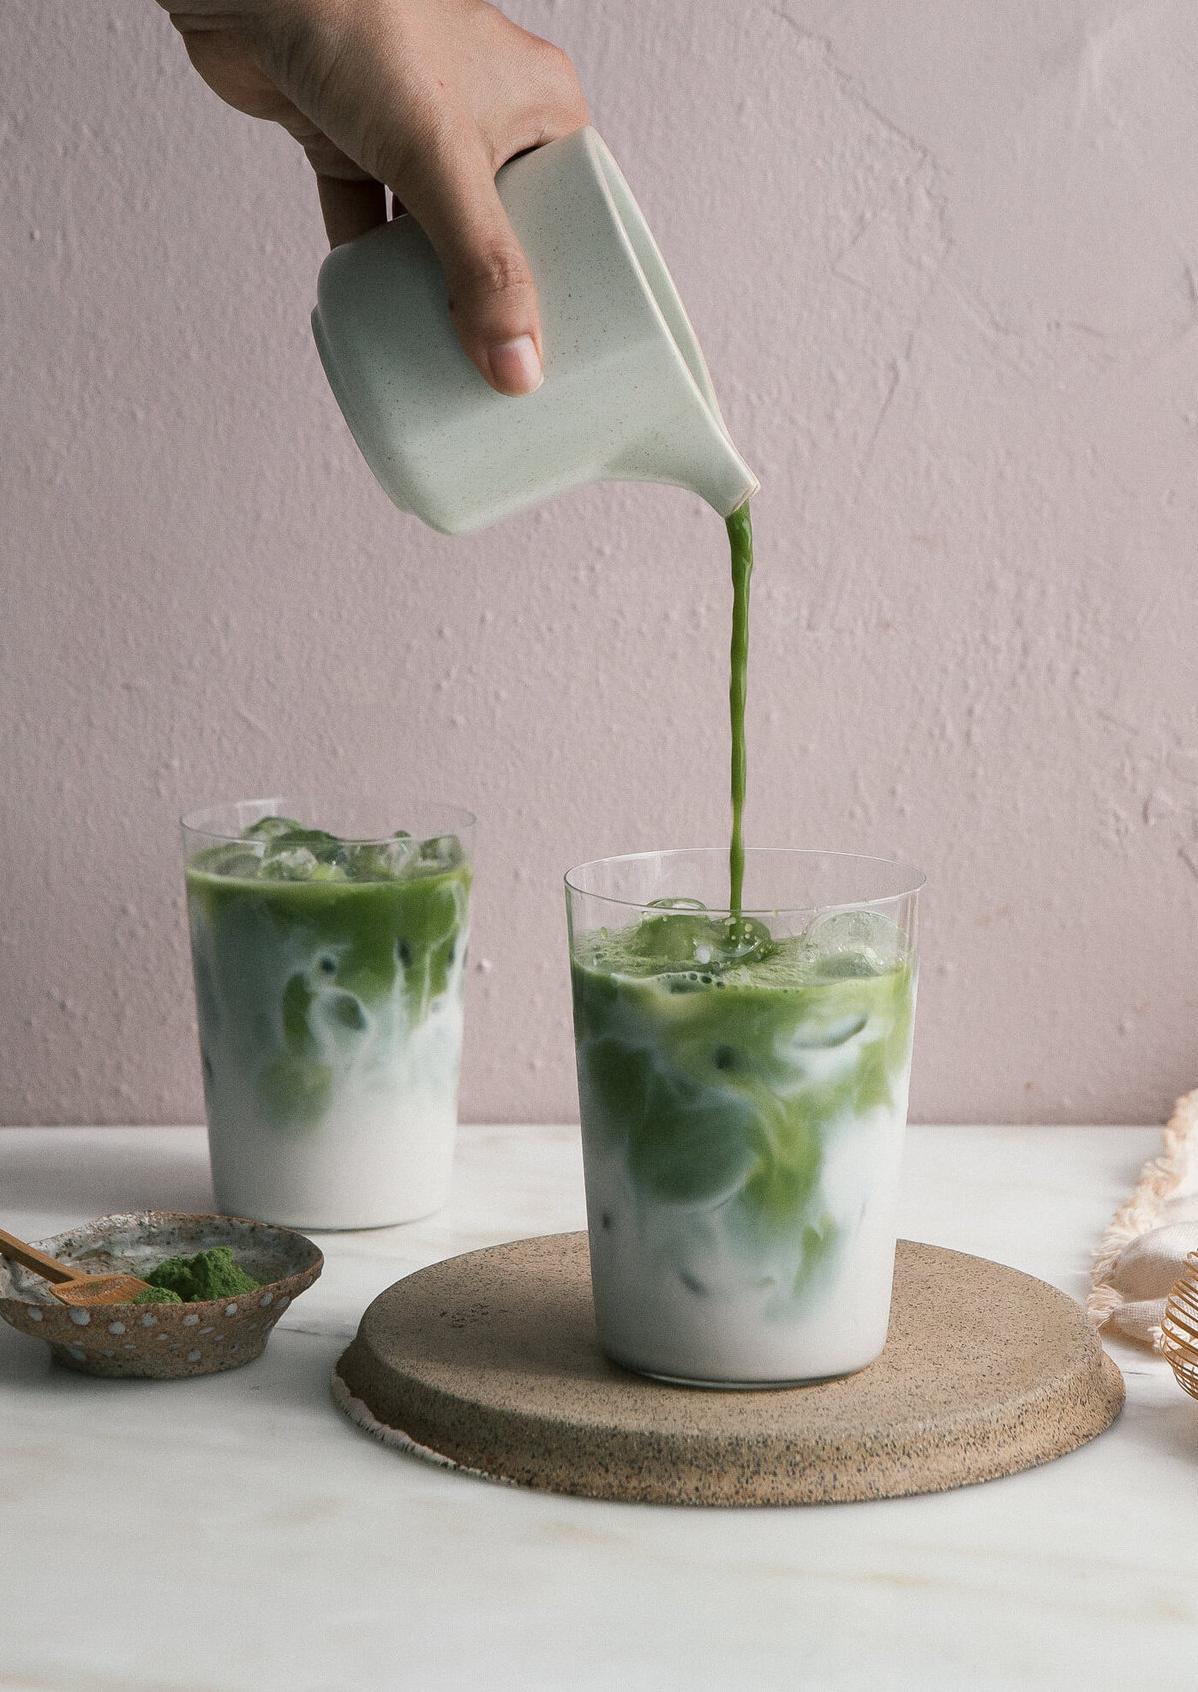  Looking for a healthier alternative to sugary drinks? Try our Iced Matcha Latte!